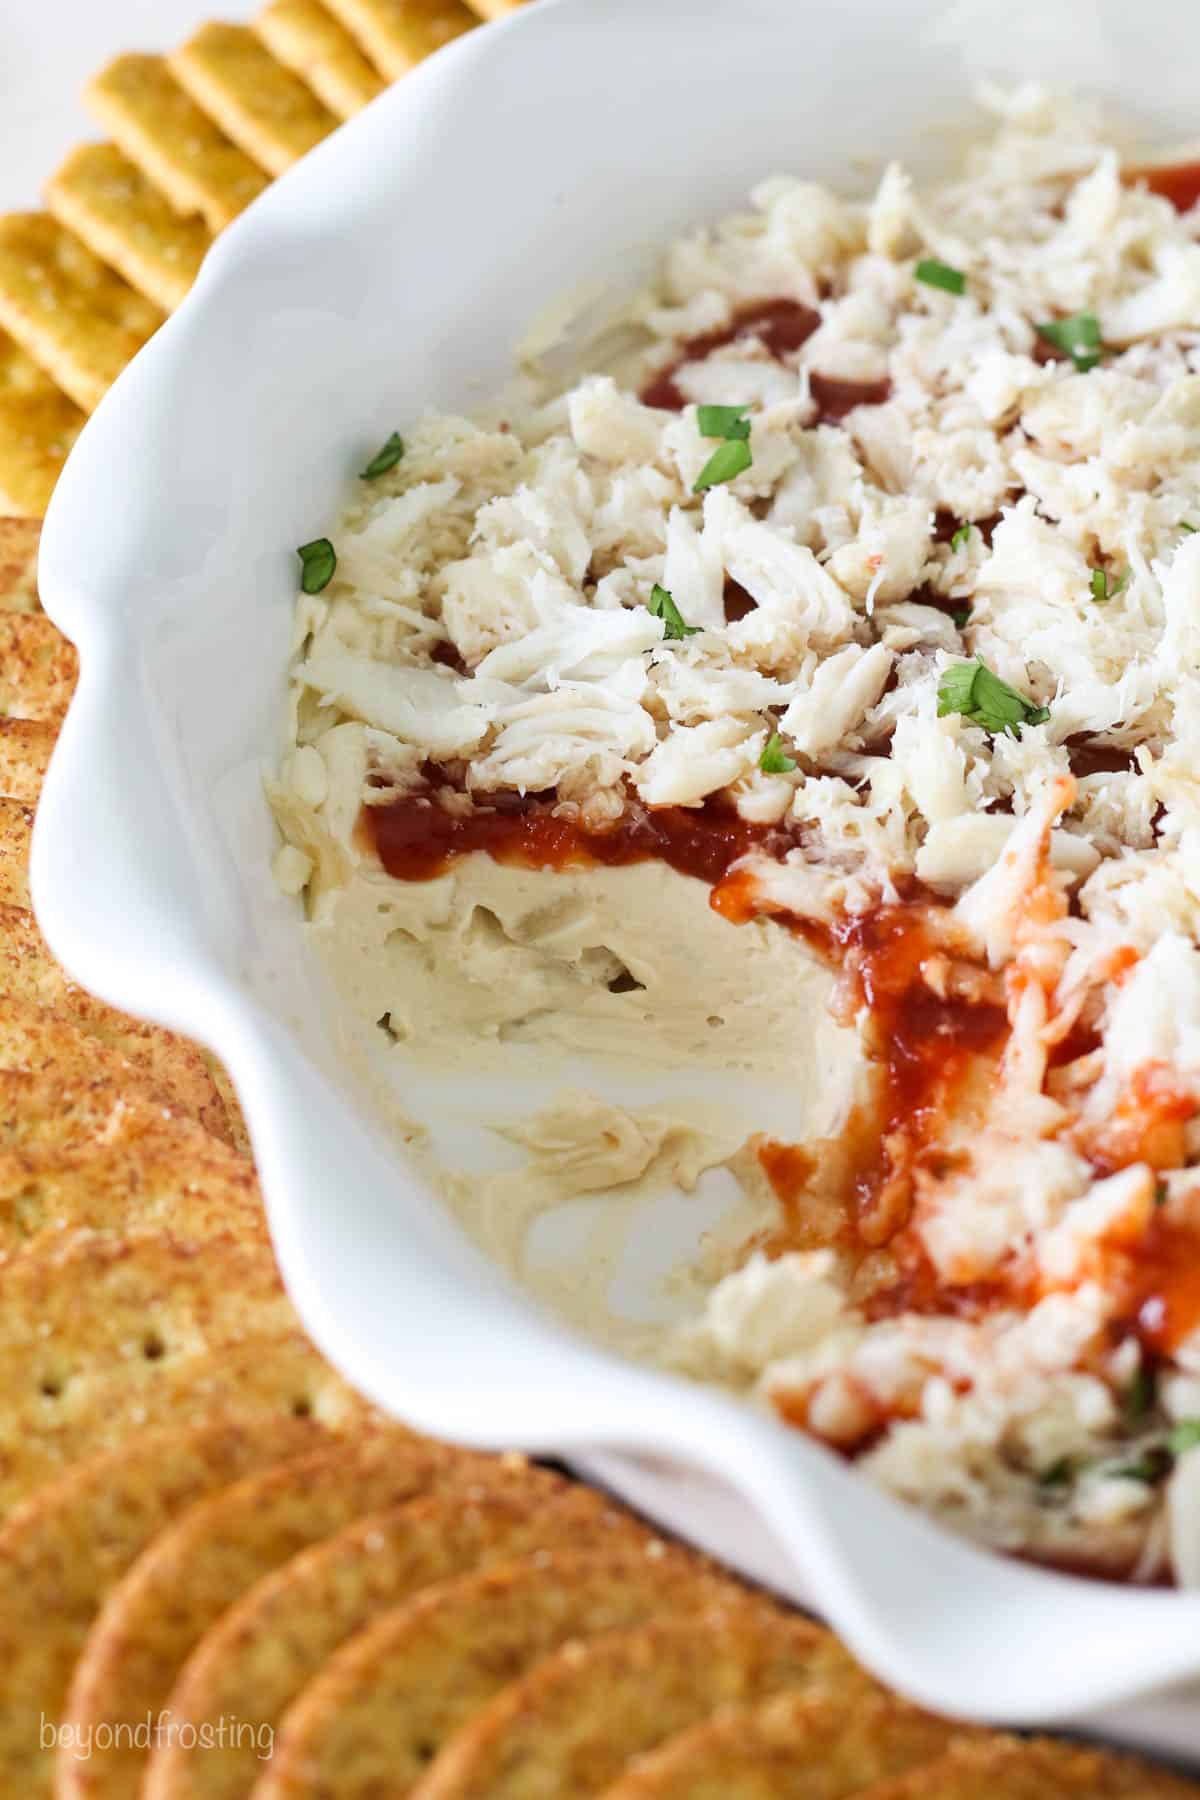 A pie dish of cold crab dip with a few servings missing